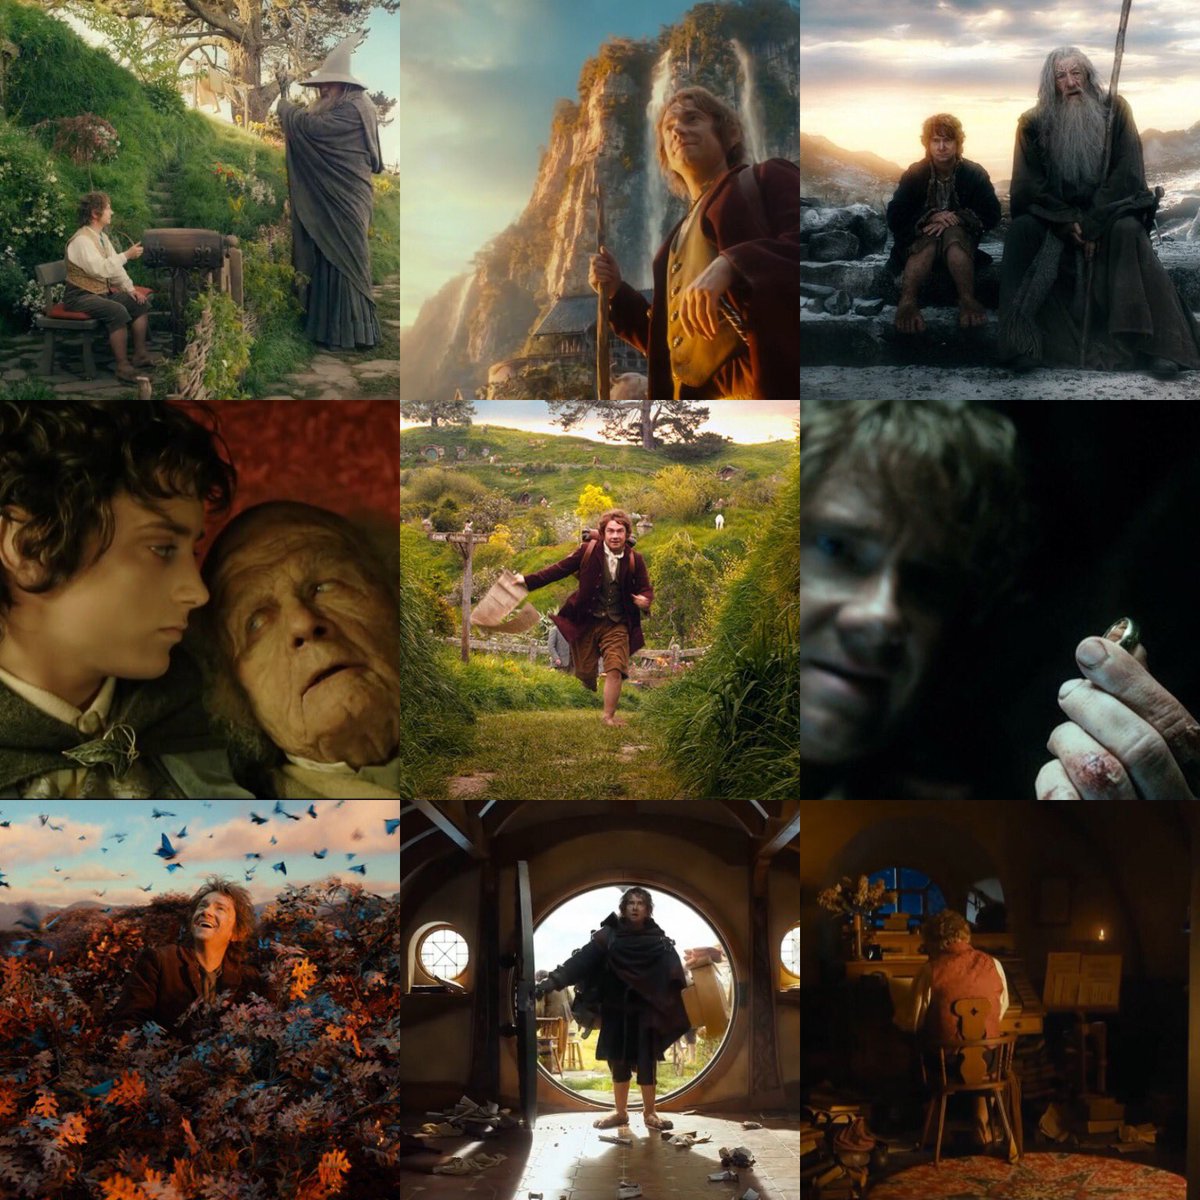 The Hobbit that started it all by leaving home and entering the world of the big folk, Bilbo Baggins.